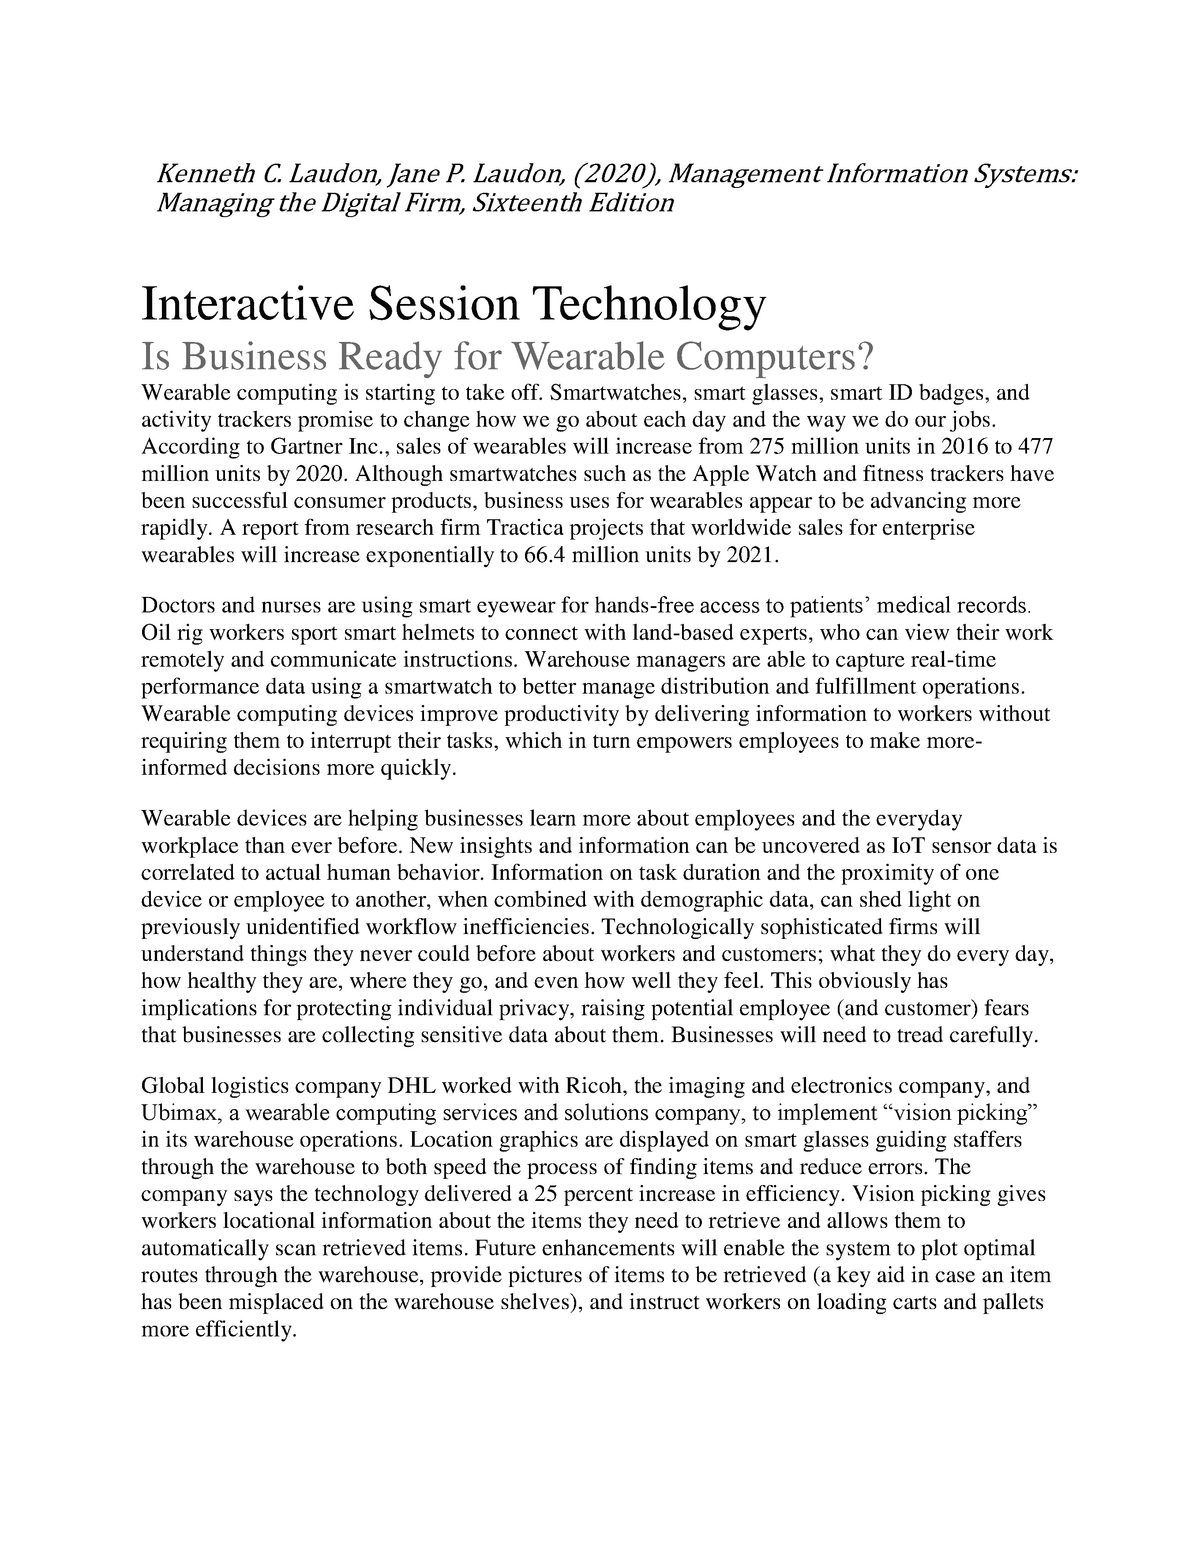 case study interactive session technology